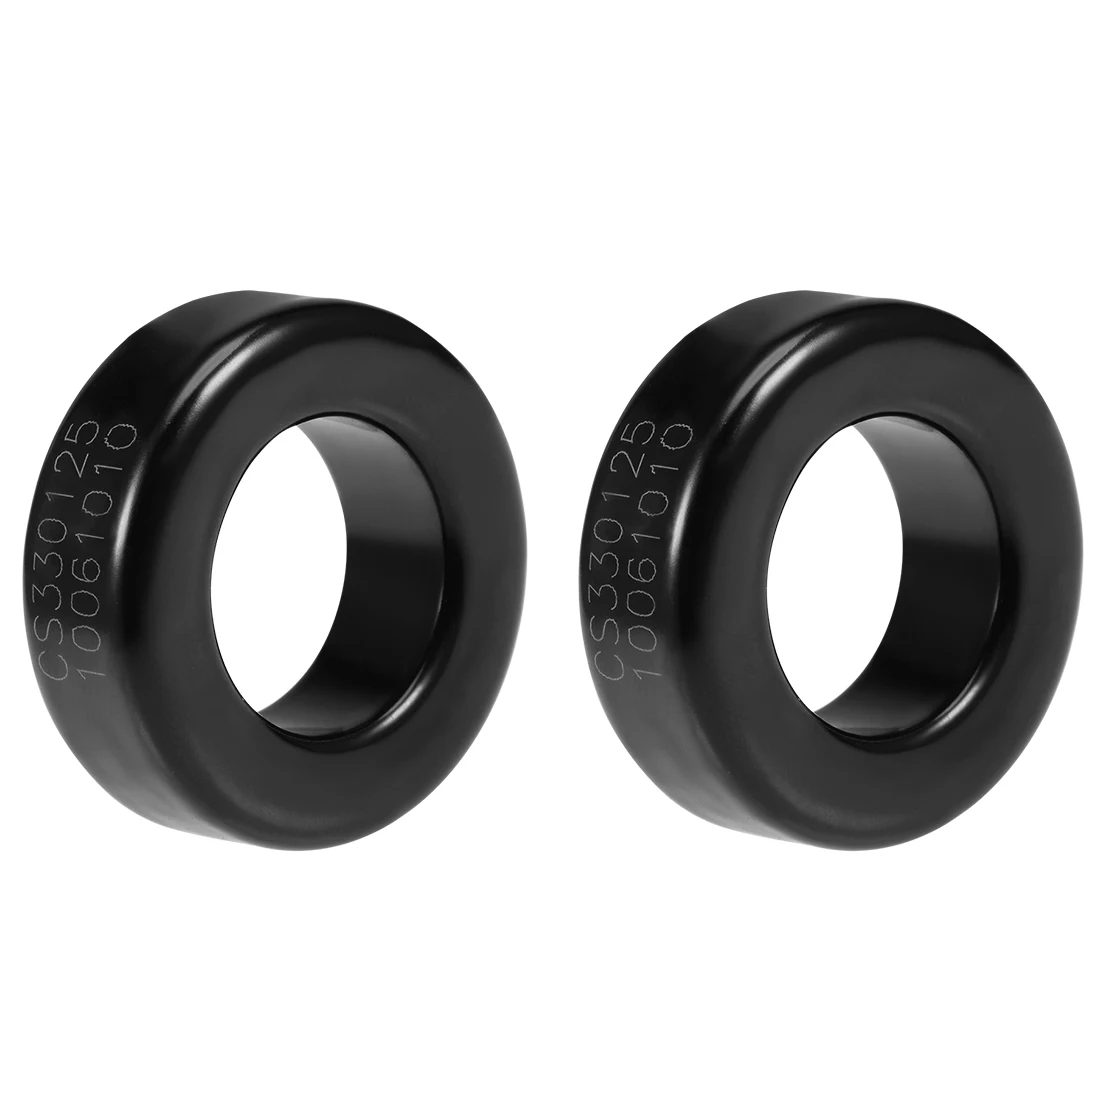 

2pcs 19.3x33.7x11.3mm Ferrite Ring Iron Powder Toroid Cores Black Gray Inductor Ferrite Rings for Power Transformers Inductors